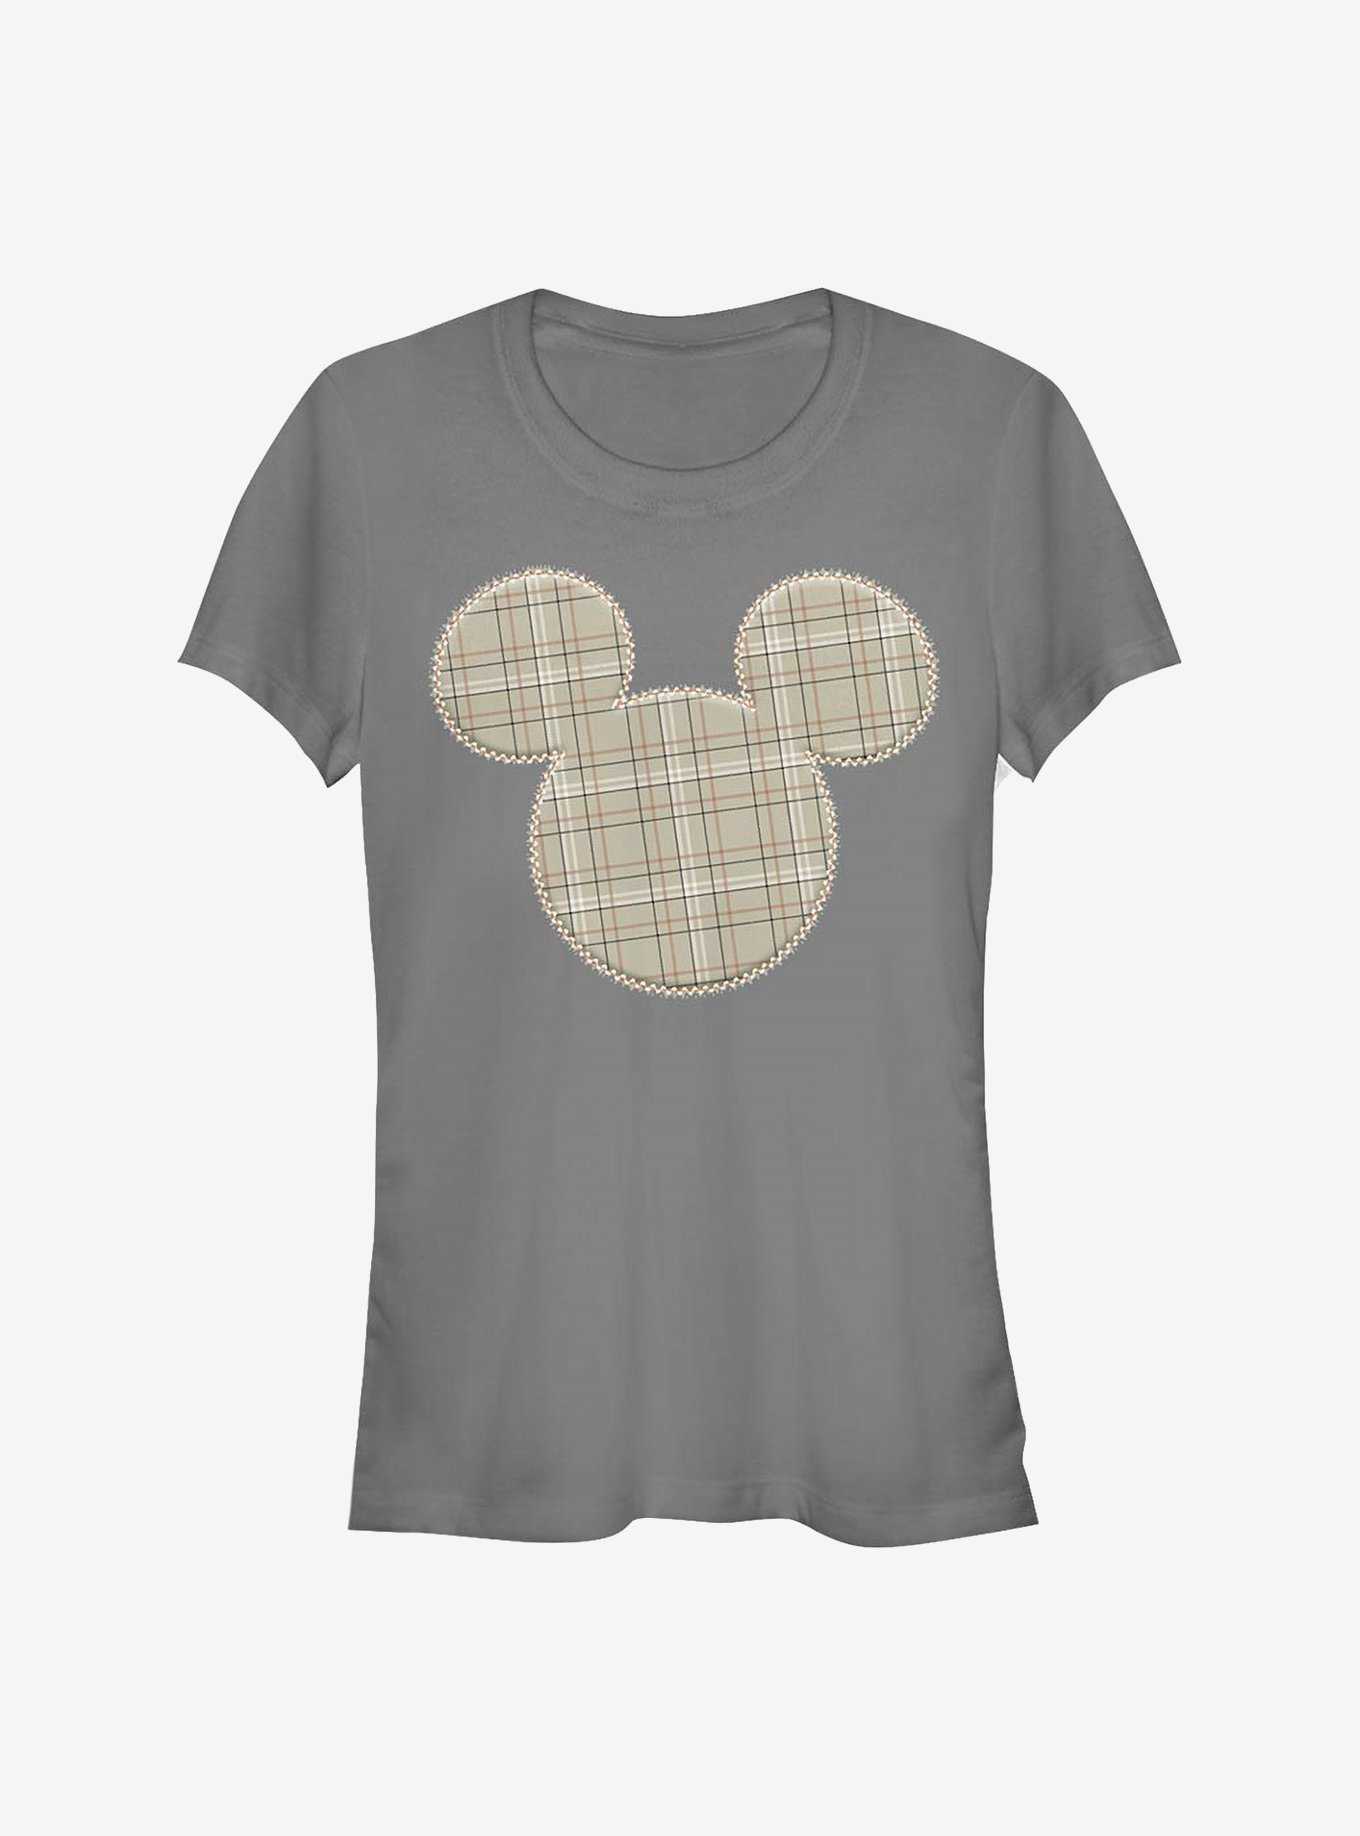 Disney Mickey Mouse Plaid Patch Mickey Girls T-Shirt, , hi-res